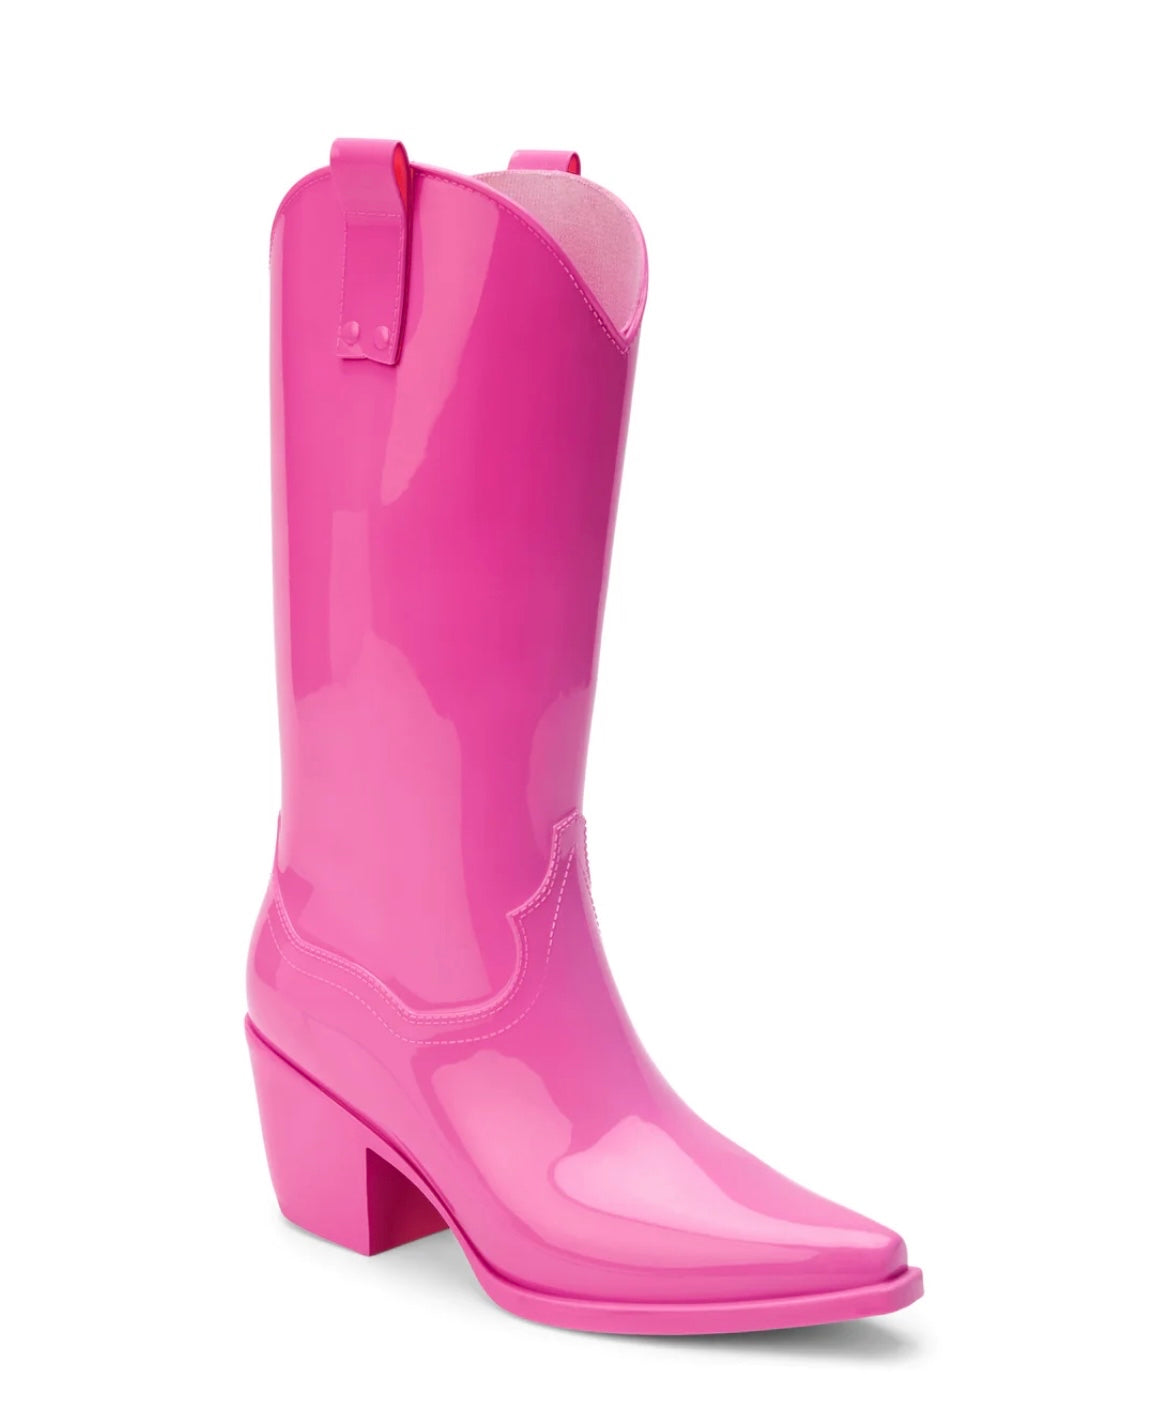 The Annie Rain Boots in Pink